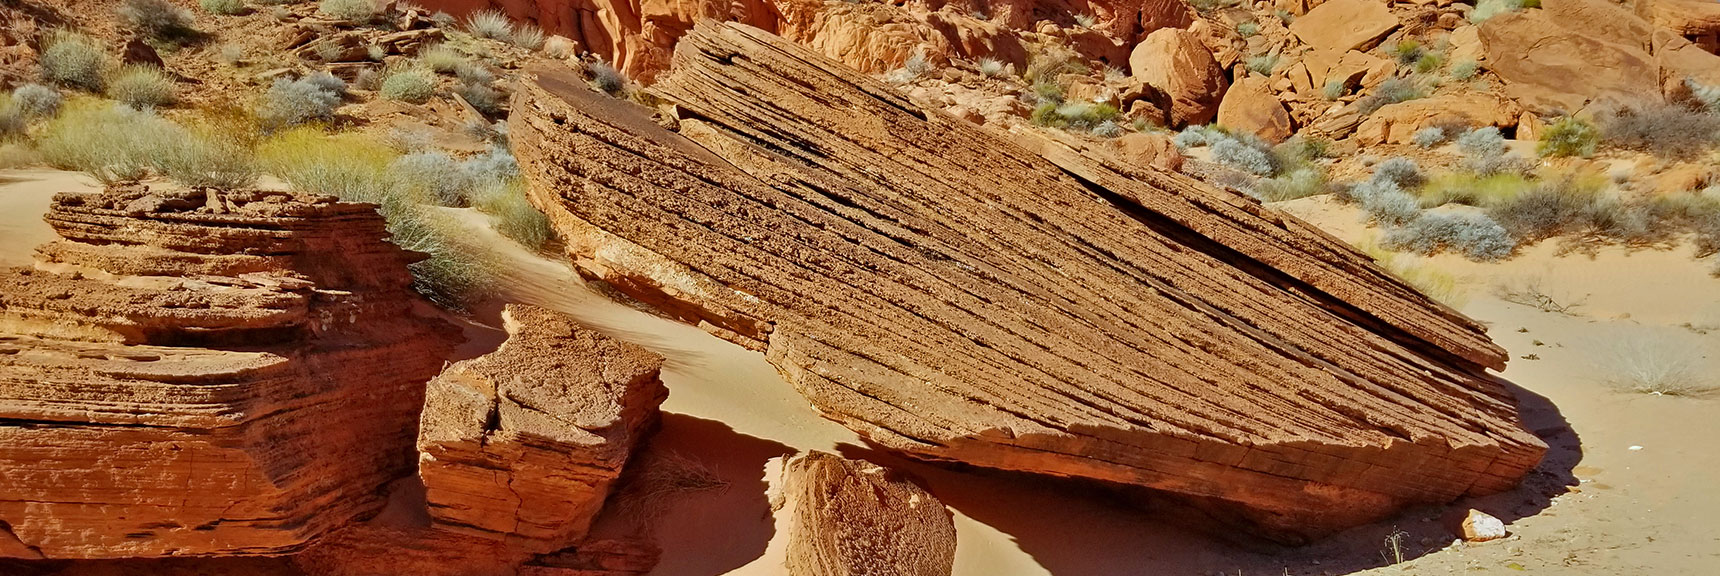 Rock Composed of Successive Silt Layers on Natural Arches Trail, Valley of Fire State Park, Nevada